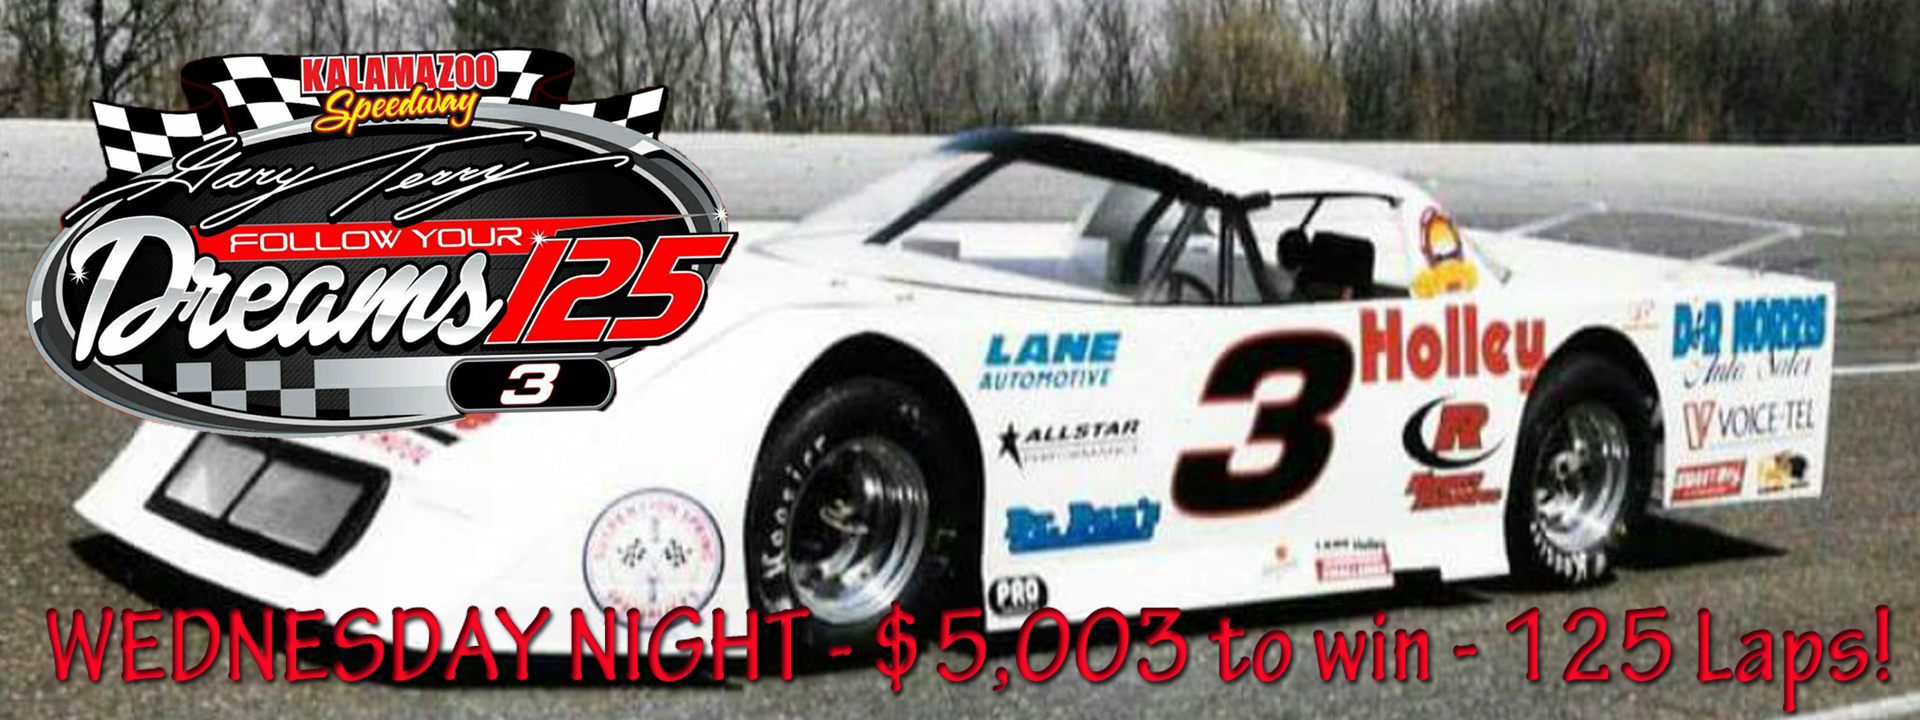 Gary Terry "Follow Your Dreams" 125 Presented by GT Products for the Outlaw Super Late Models - Allstar Performance Pro/Street Stock Rumble